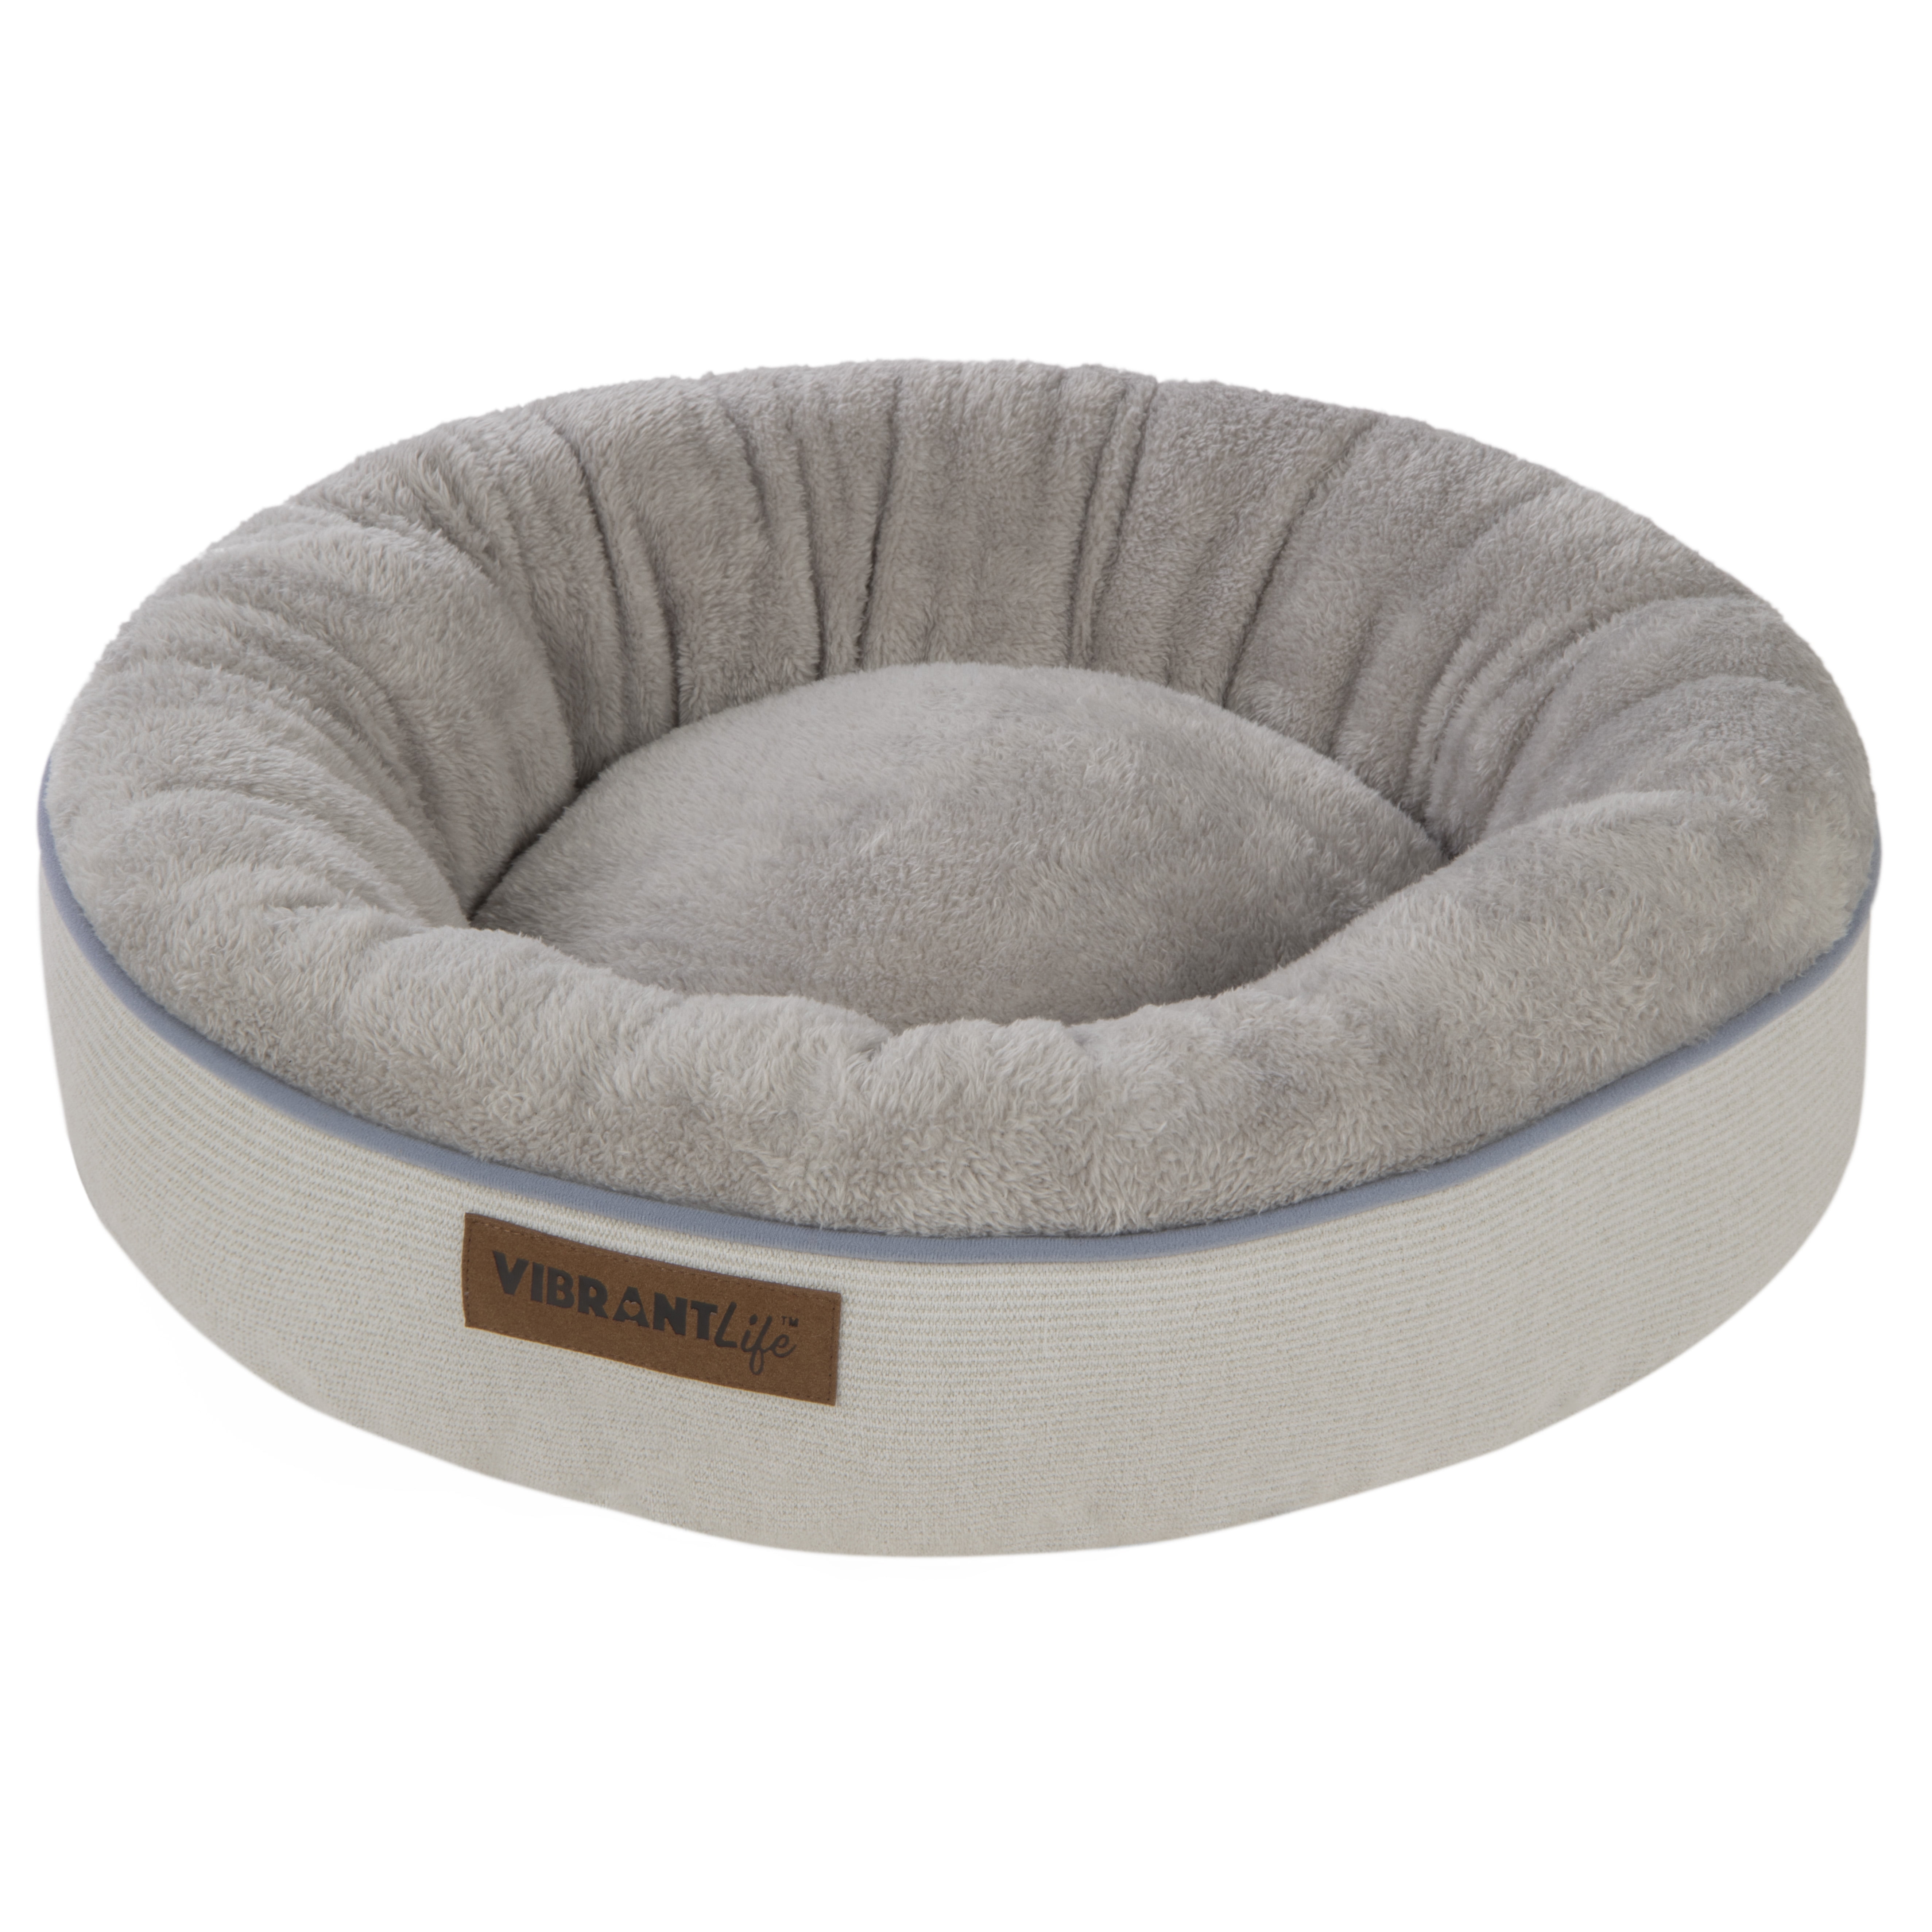 Vibrant Life Round Dreamer Mattress Edition Dog Bed, Small, 22"x22", Up to 35lbs